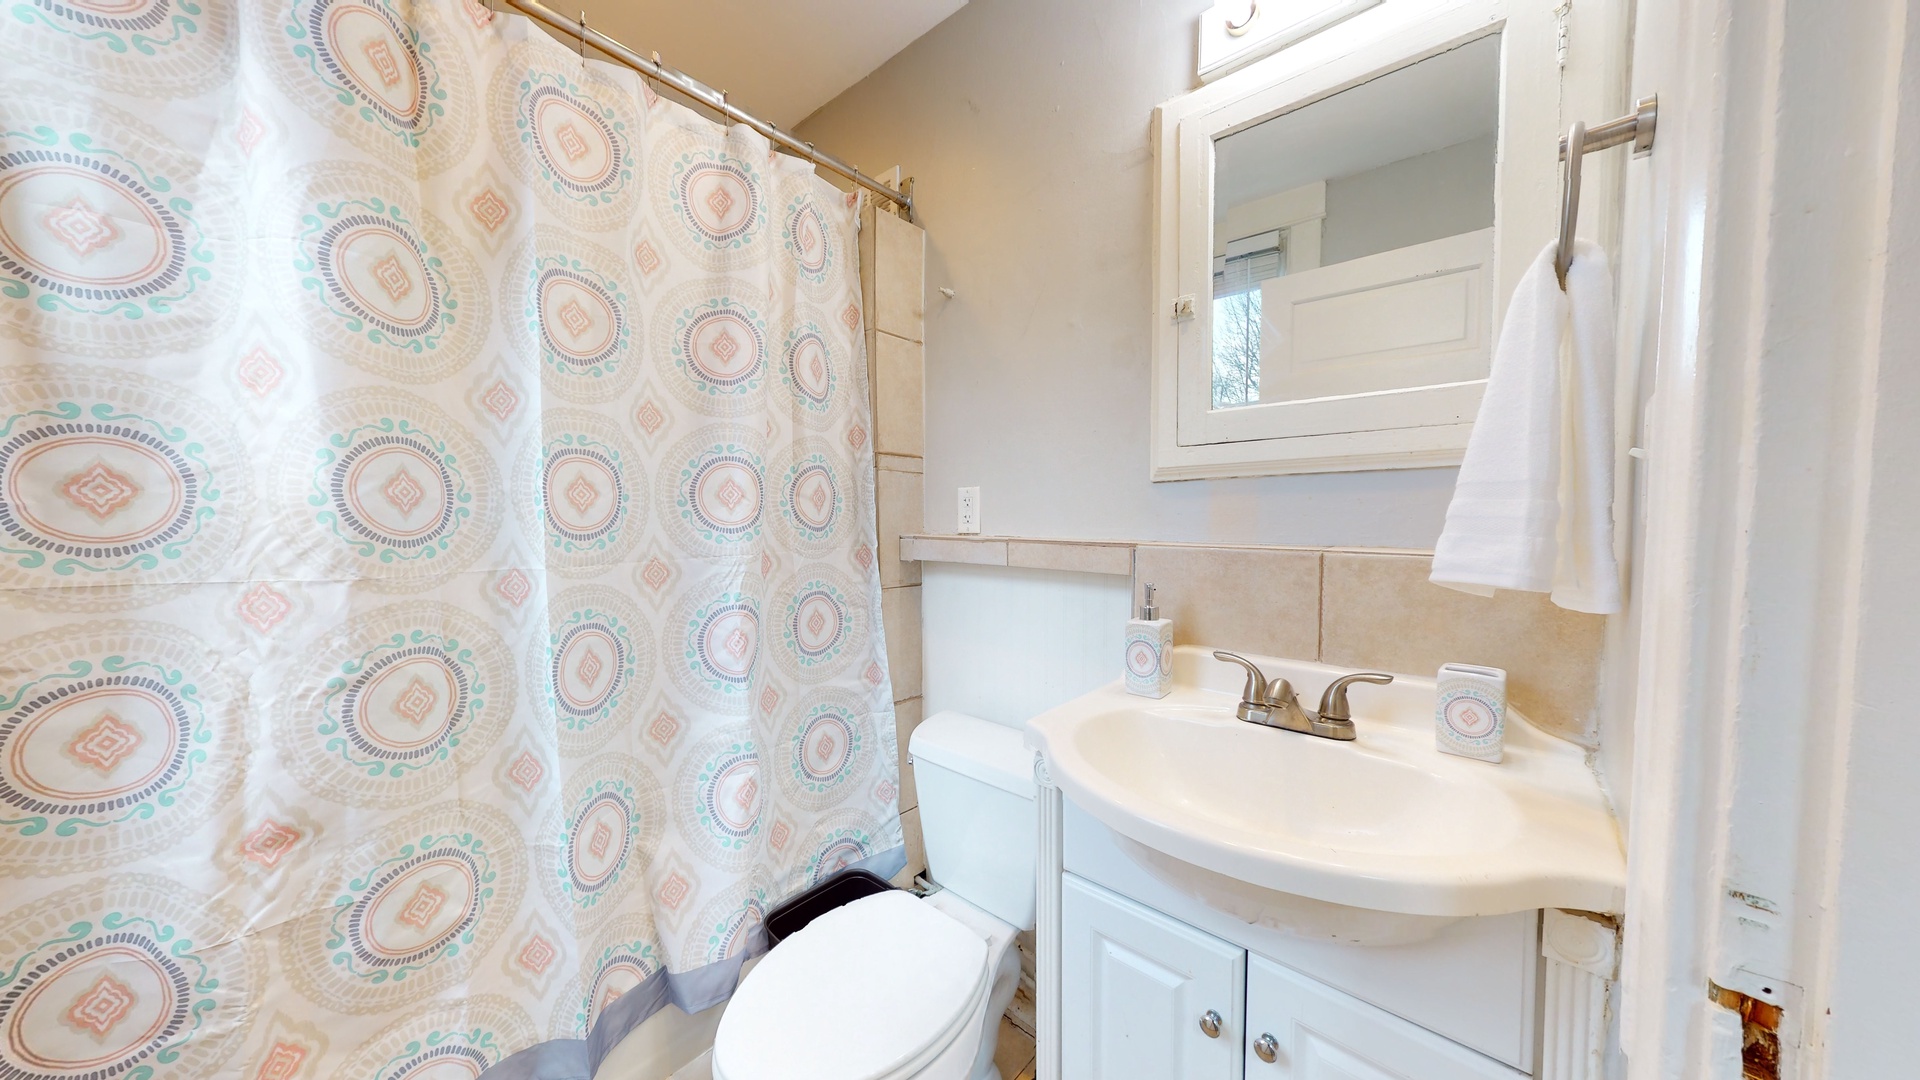 The full bath features a single vanity, mirror storage, & shower/tub combo